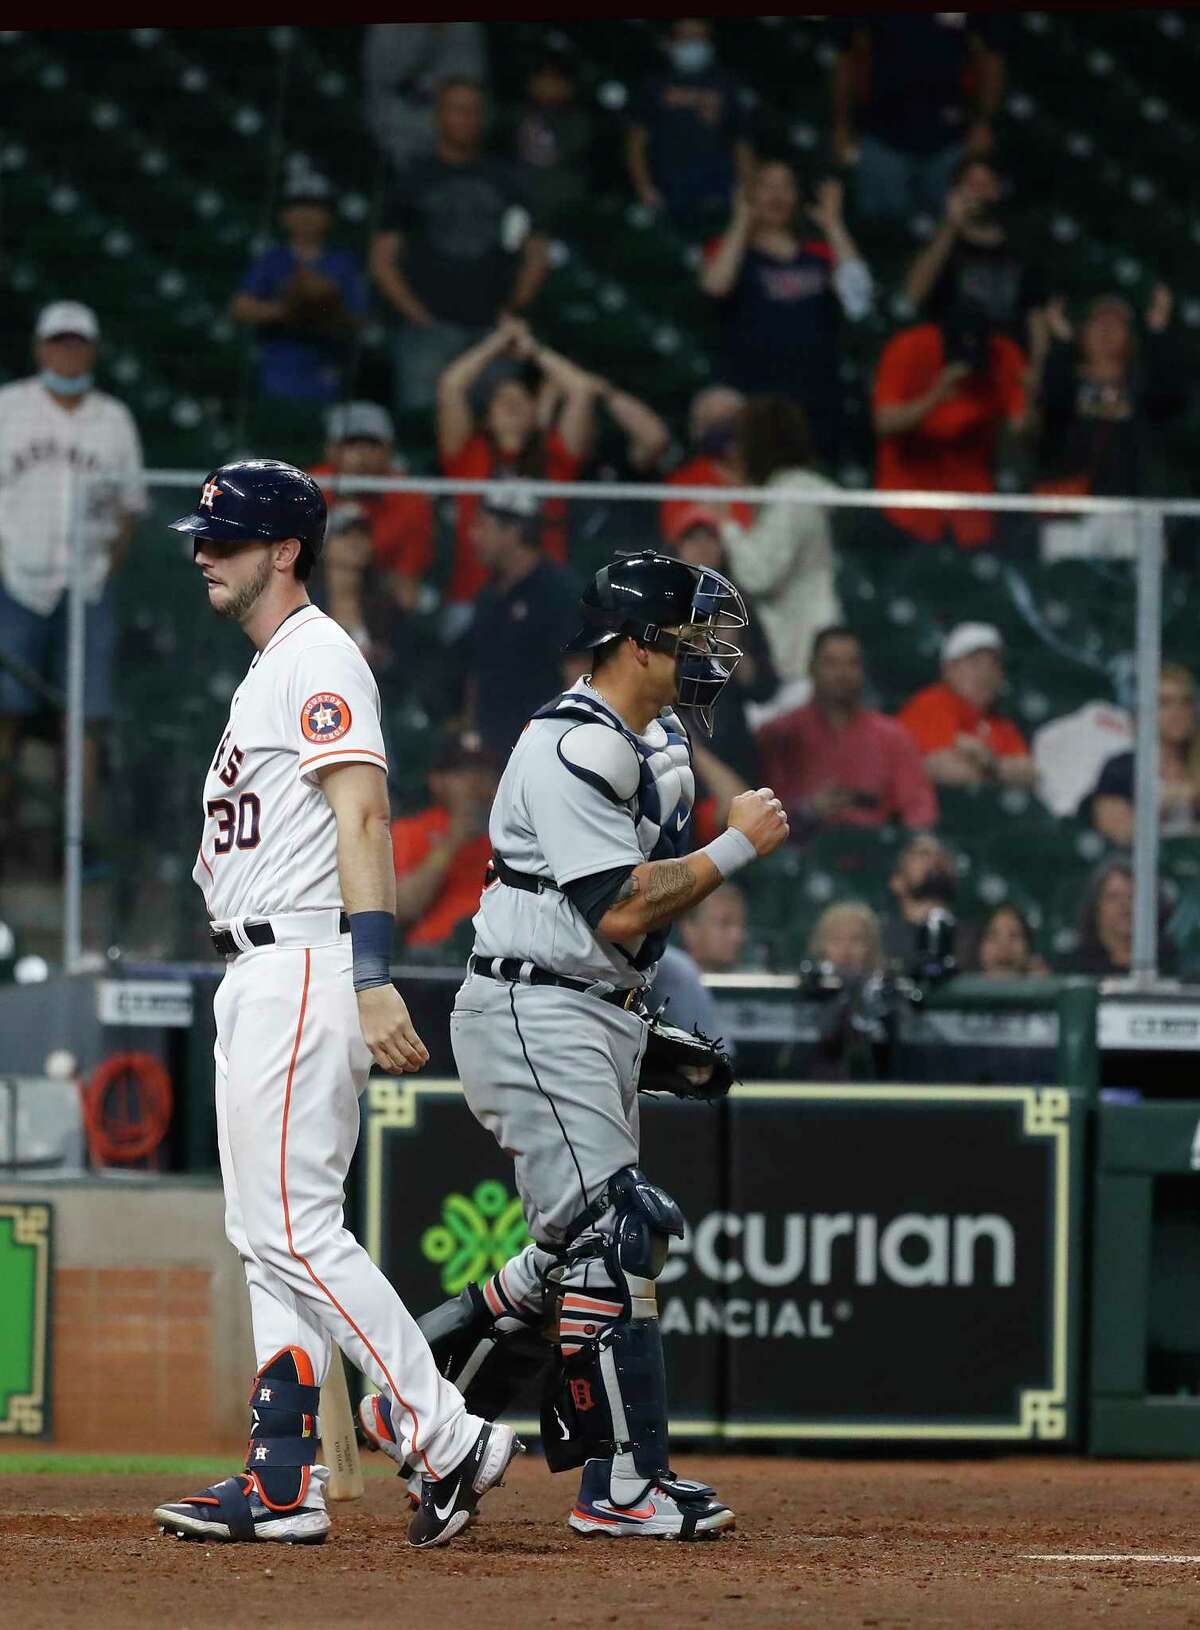 Houston Astros right fielder Kyle Tucker (30) reacts after striking out with the bases loaded to end the ninth inning of an MLB baseball game at Minute Maid Park, in Houston, Wednesday, April 14, 2021.